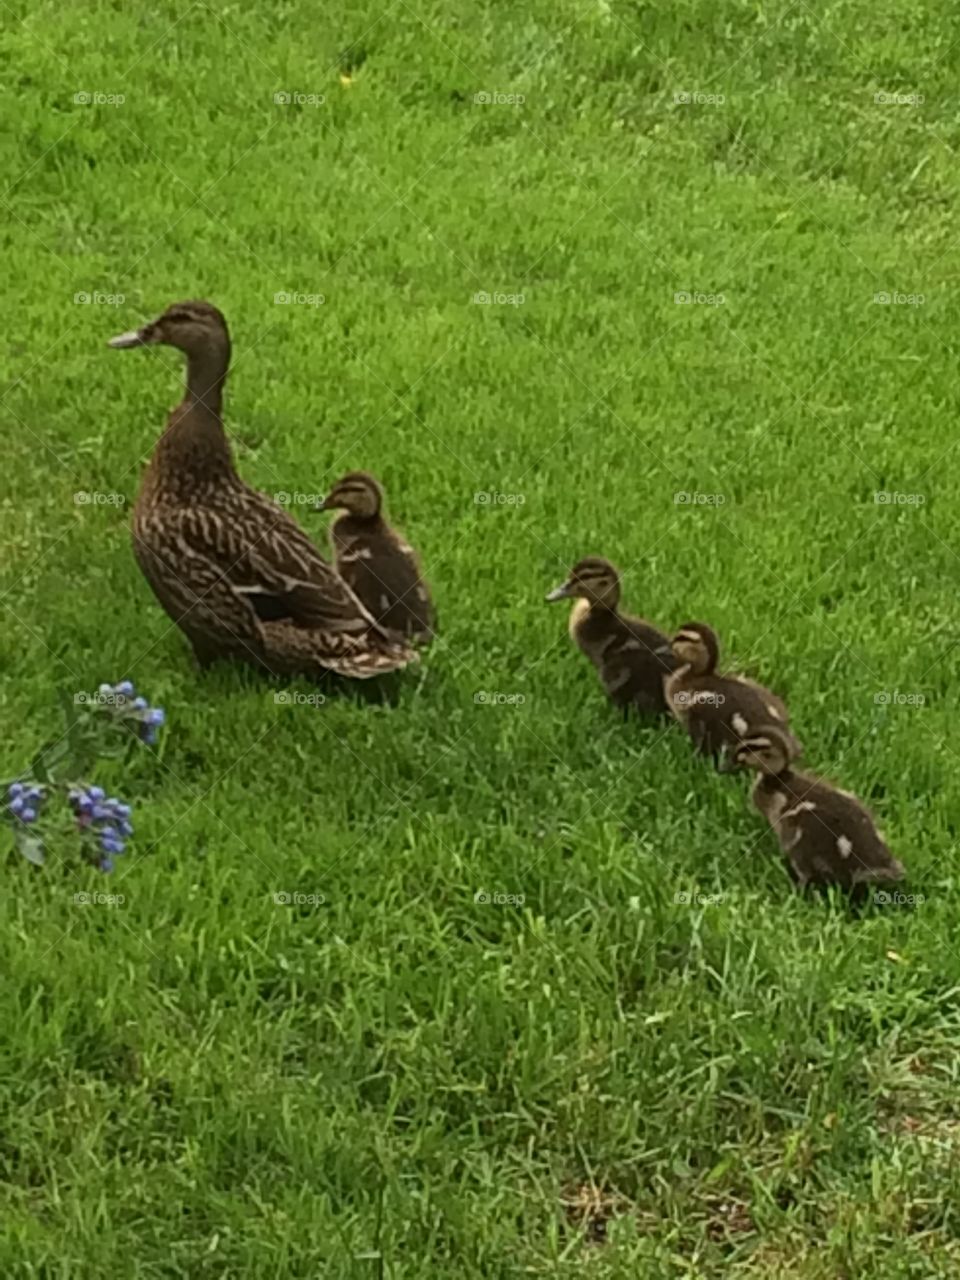 A mother with her cute kids